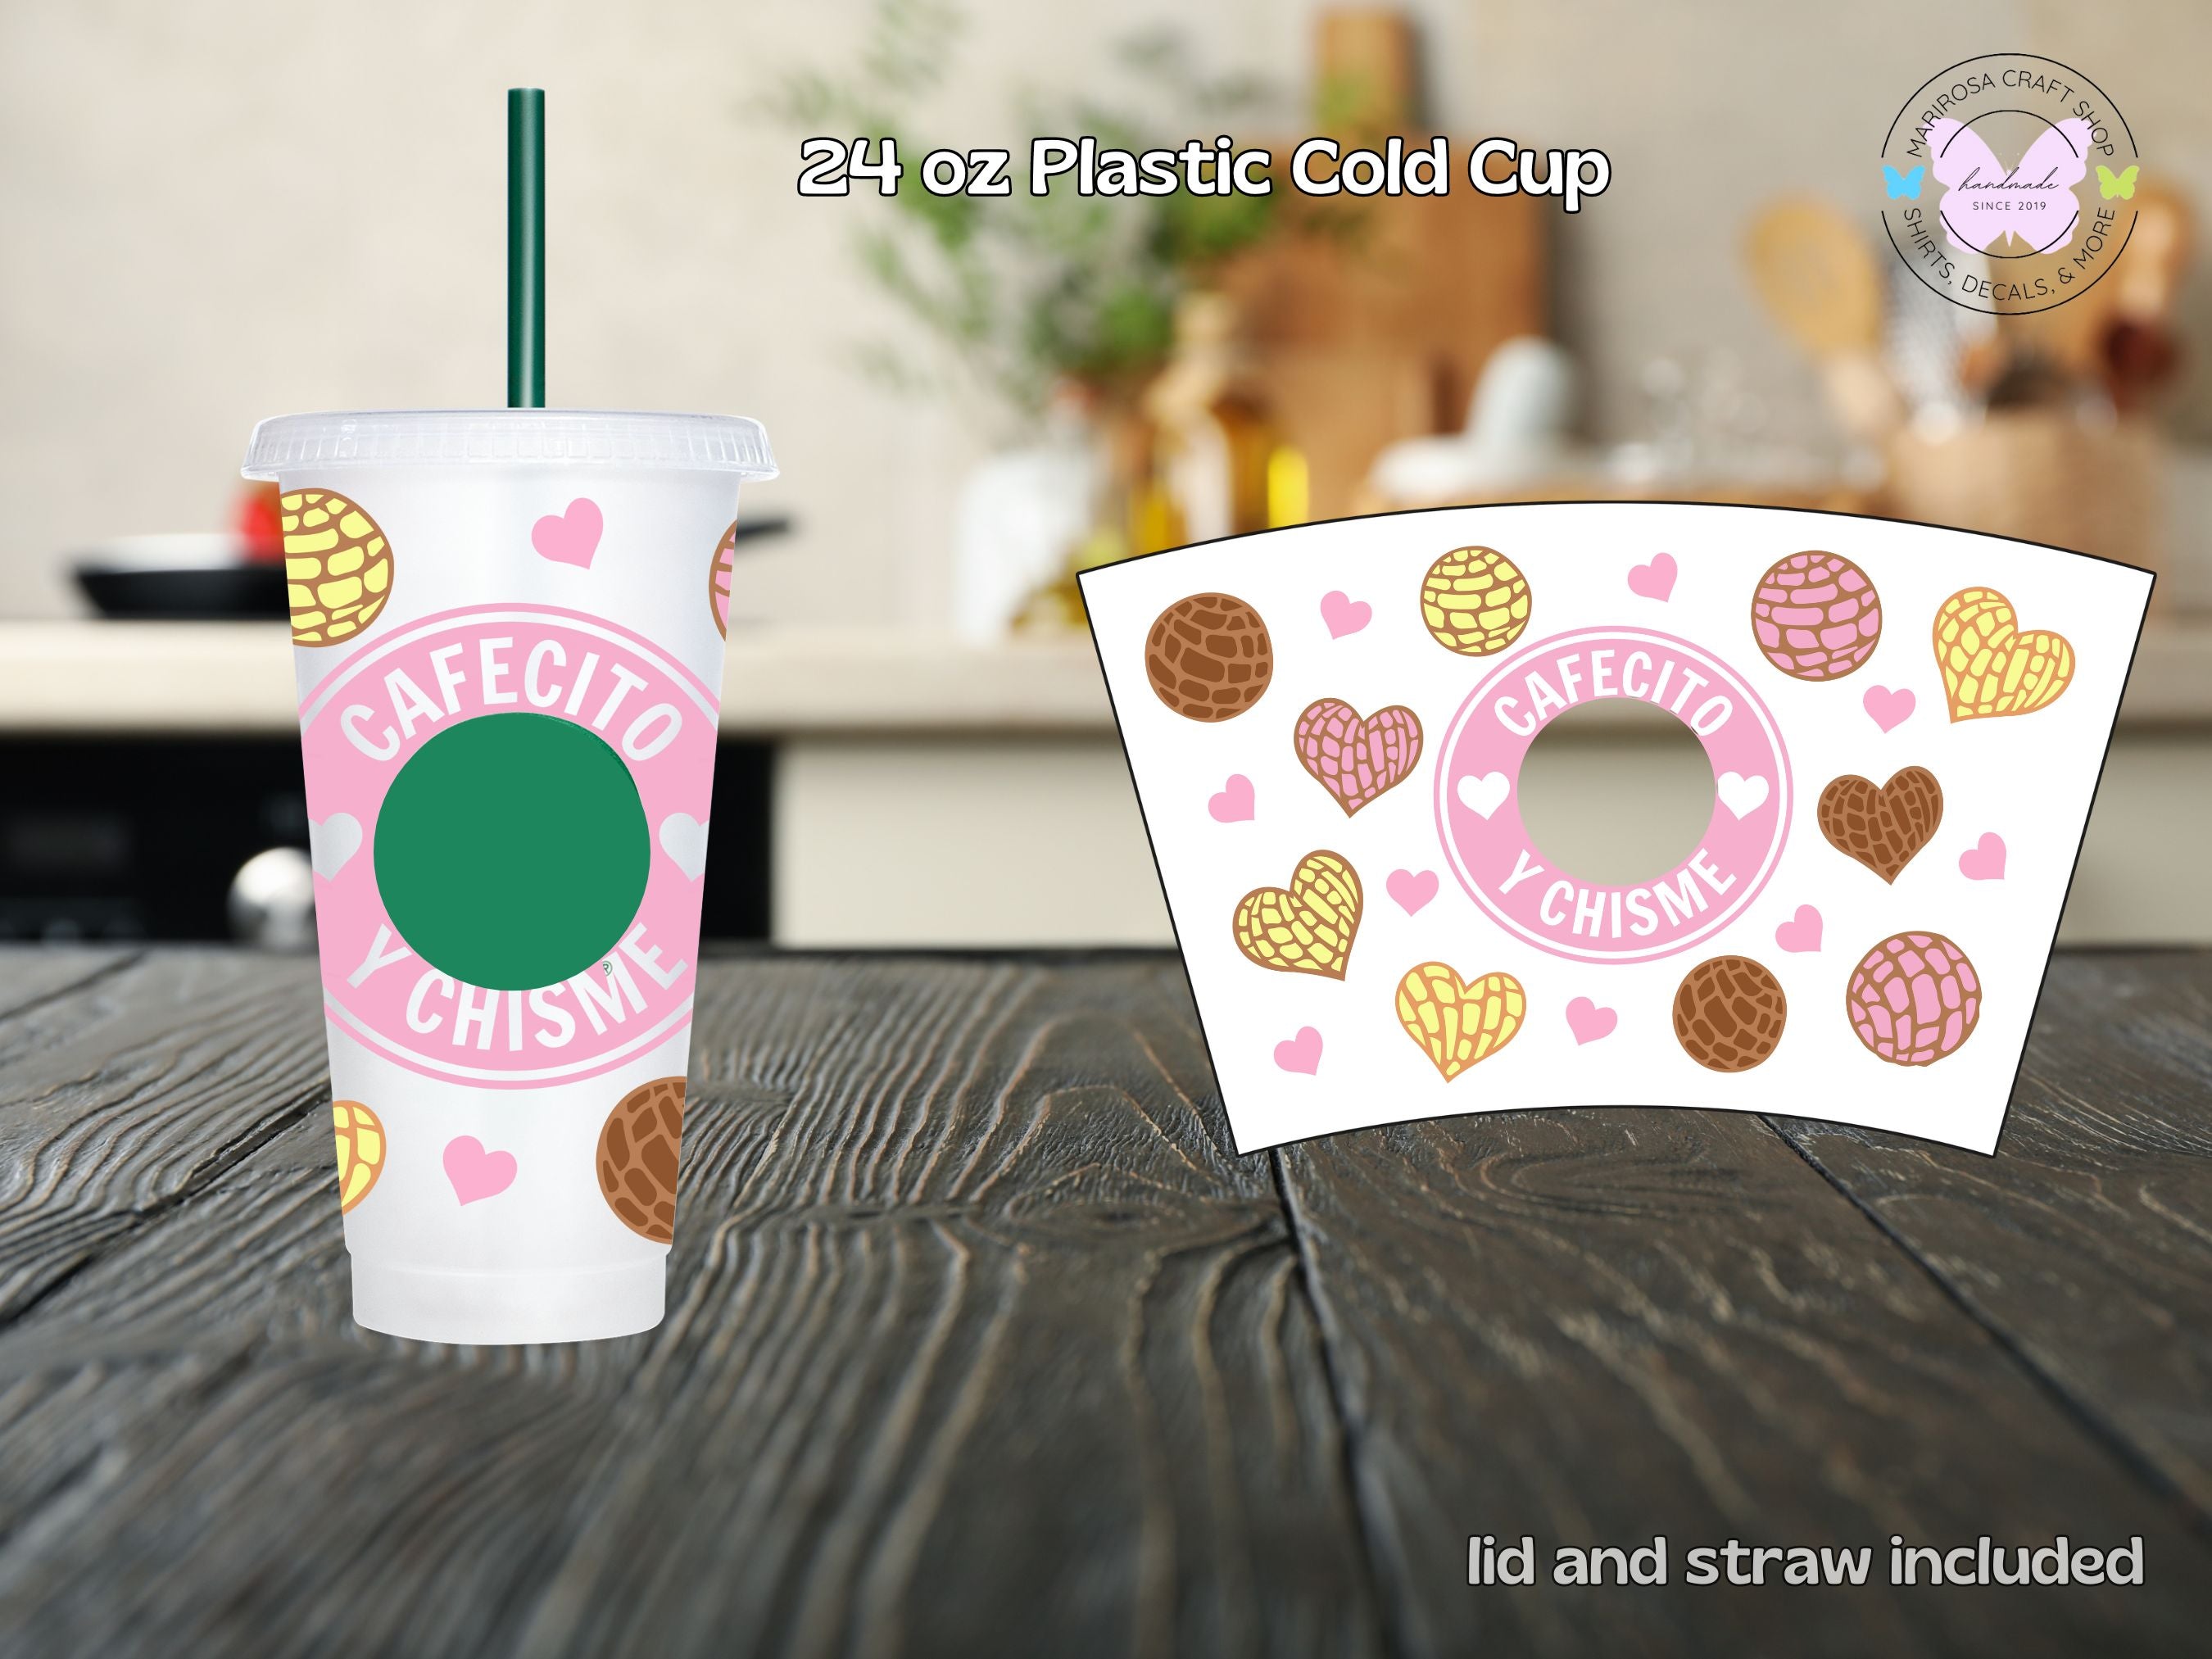 Cafecito Y Chisme Starbucks Cup// Concha Starbucks Cup// Pan Dulce